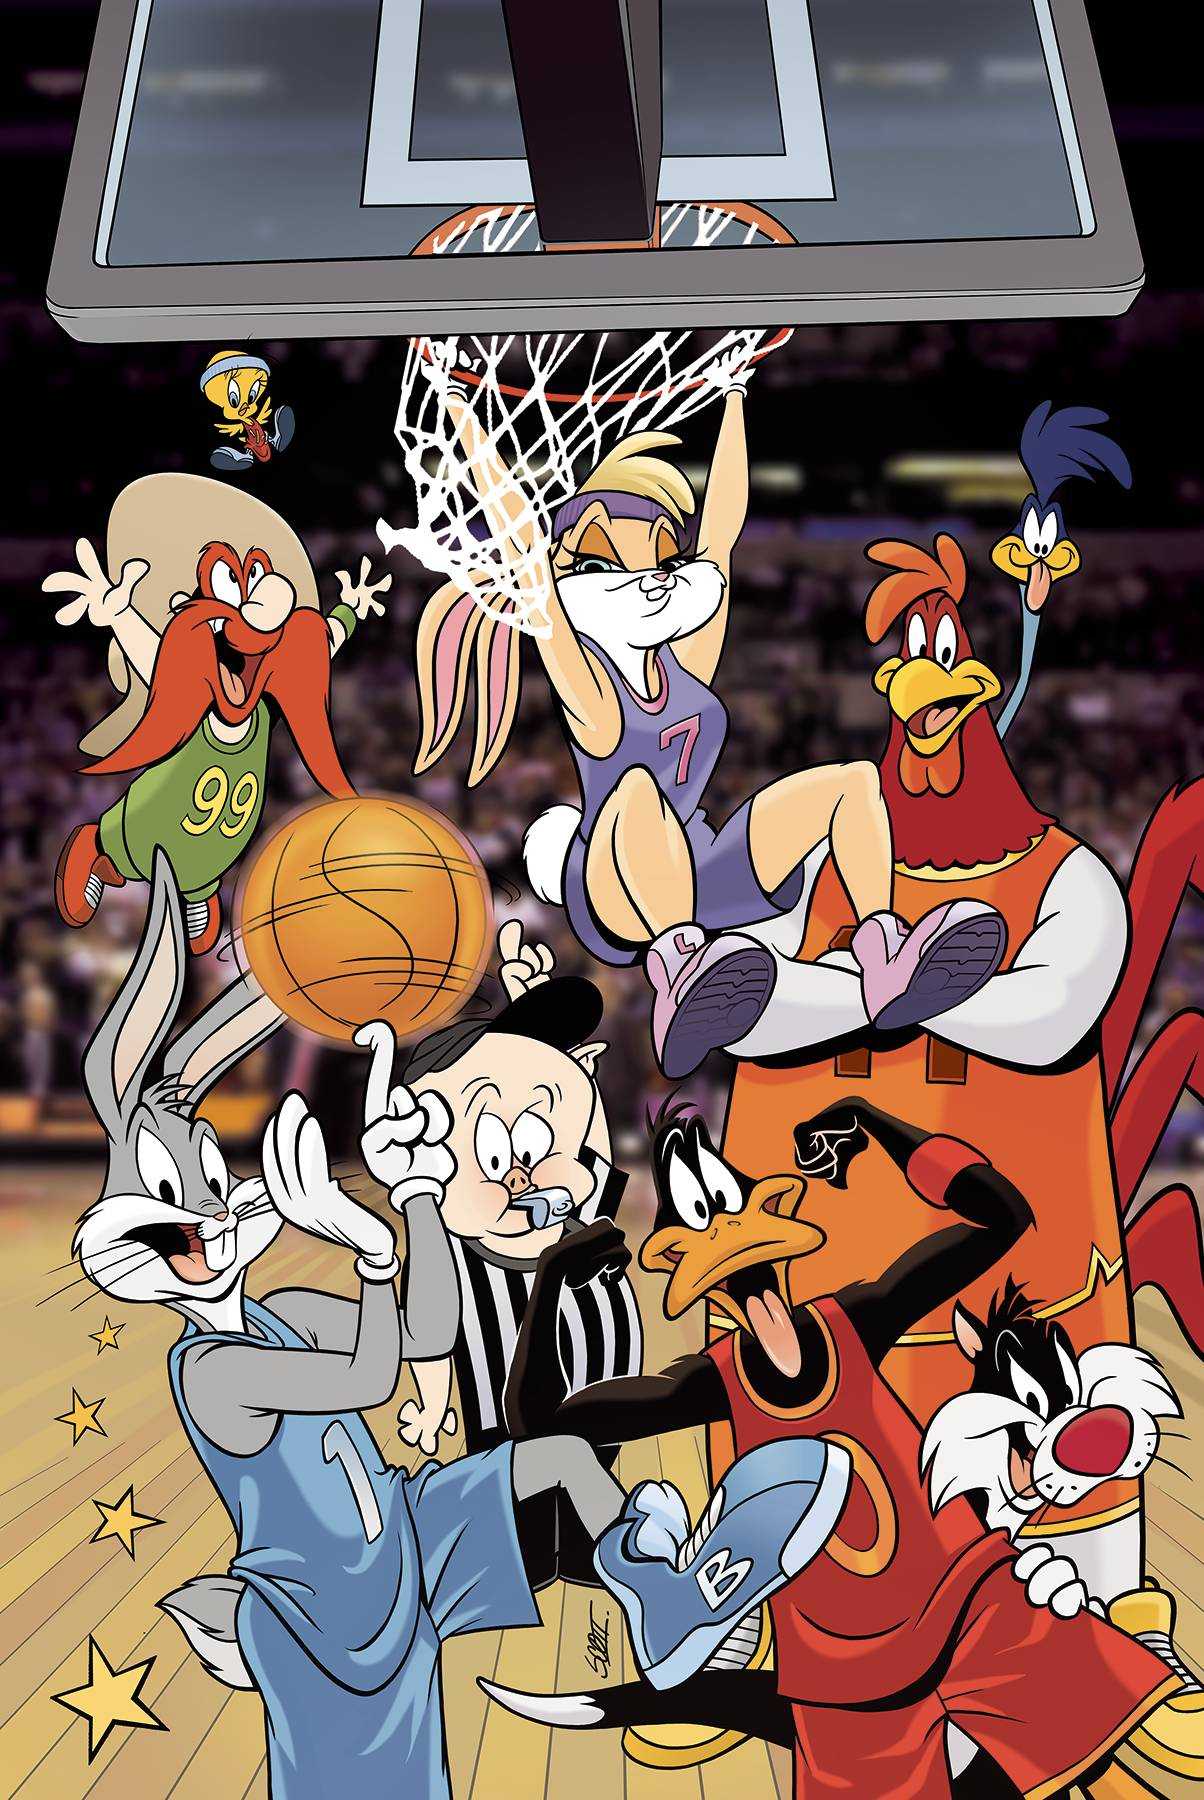 Space Jam Wallpapers 1